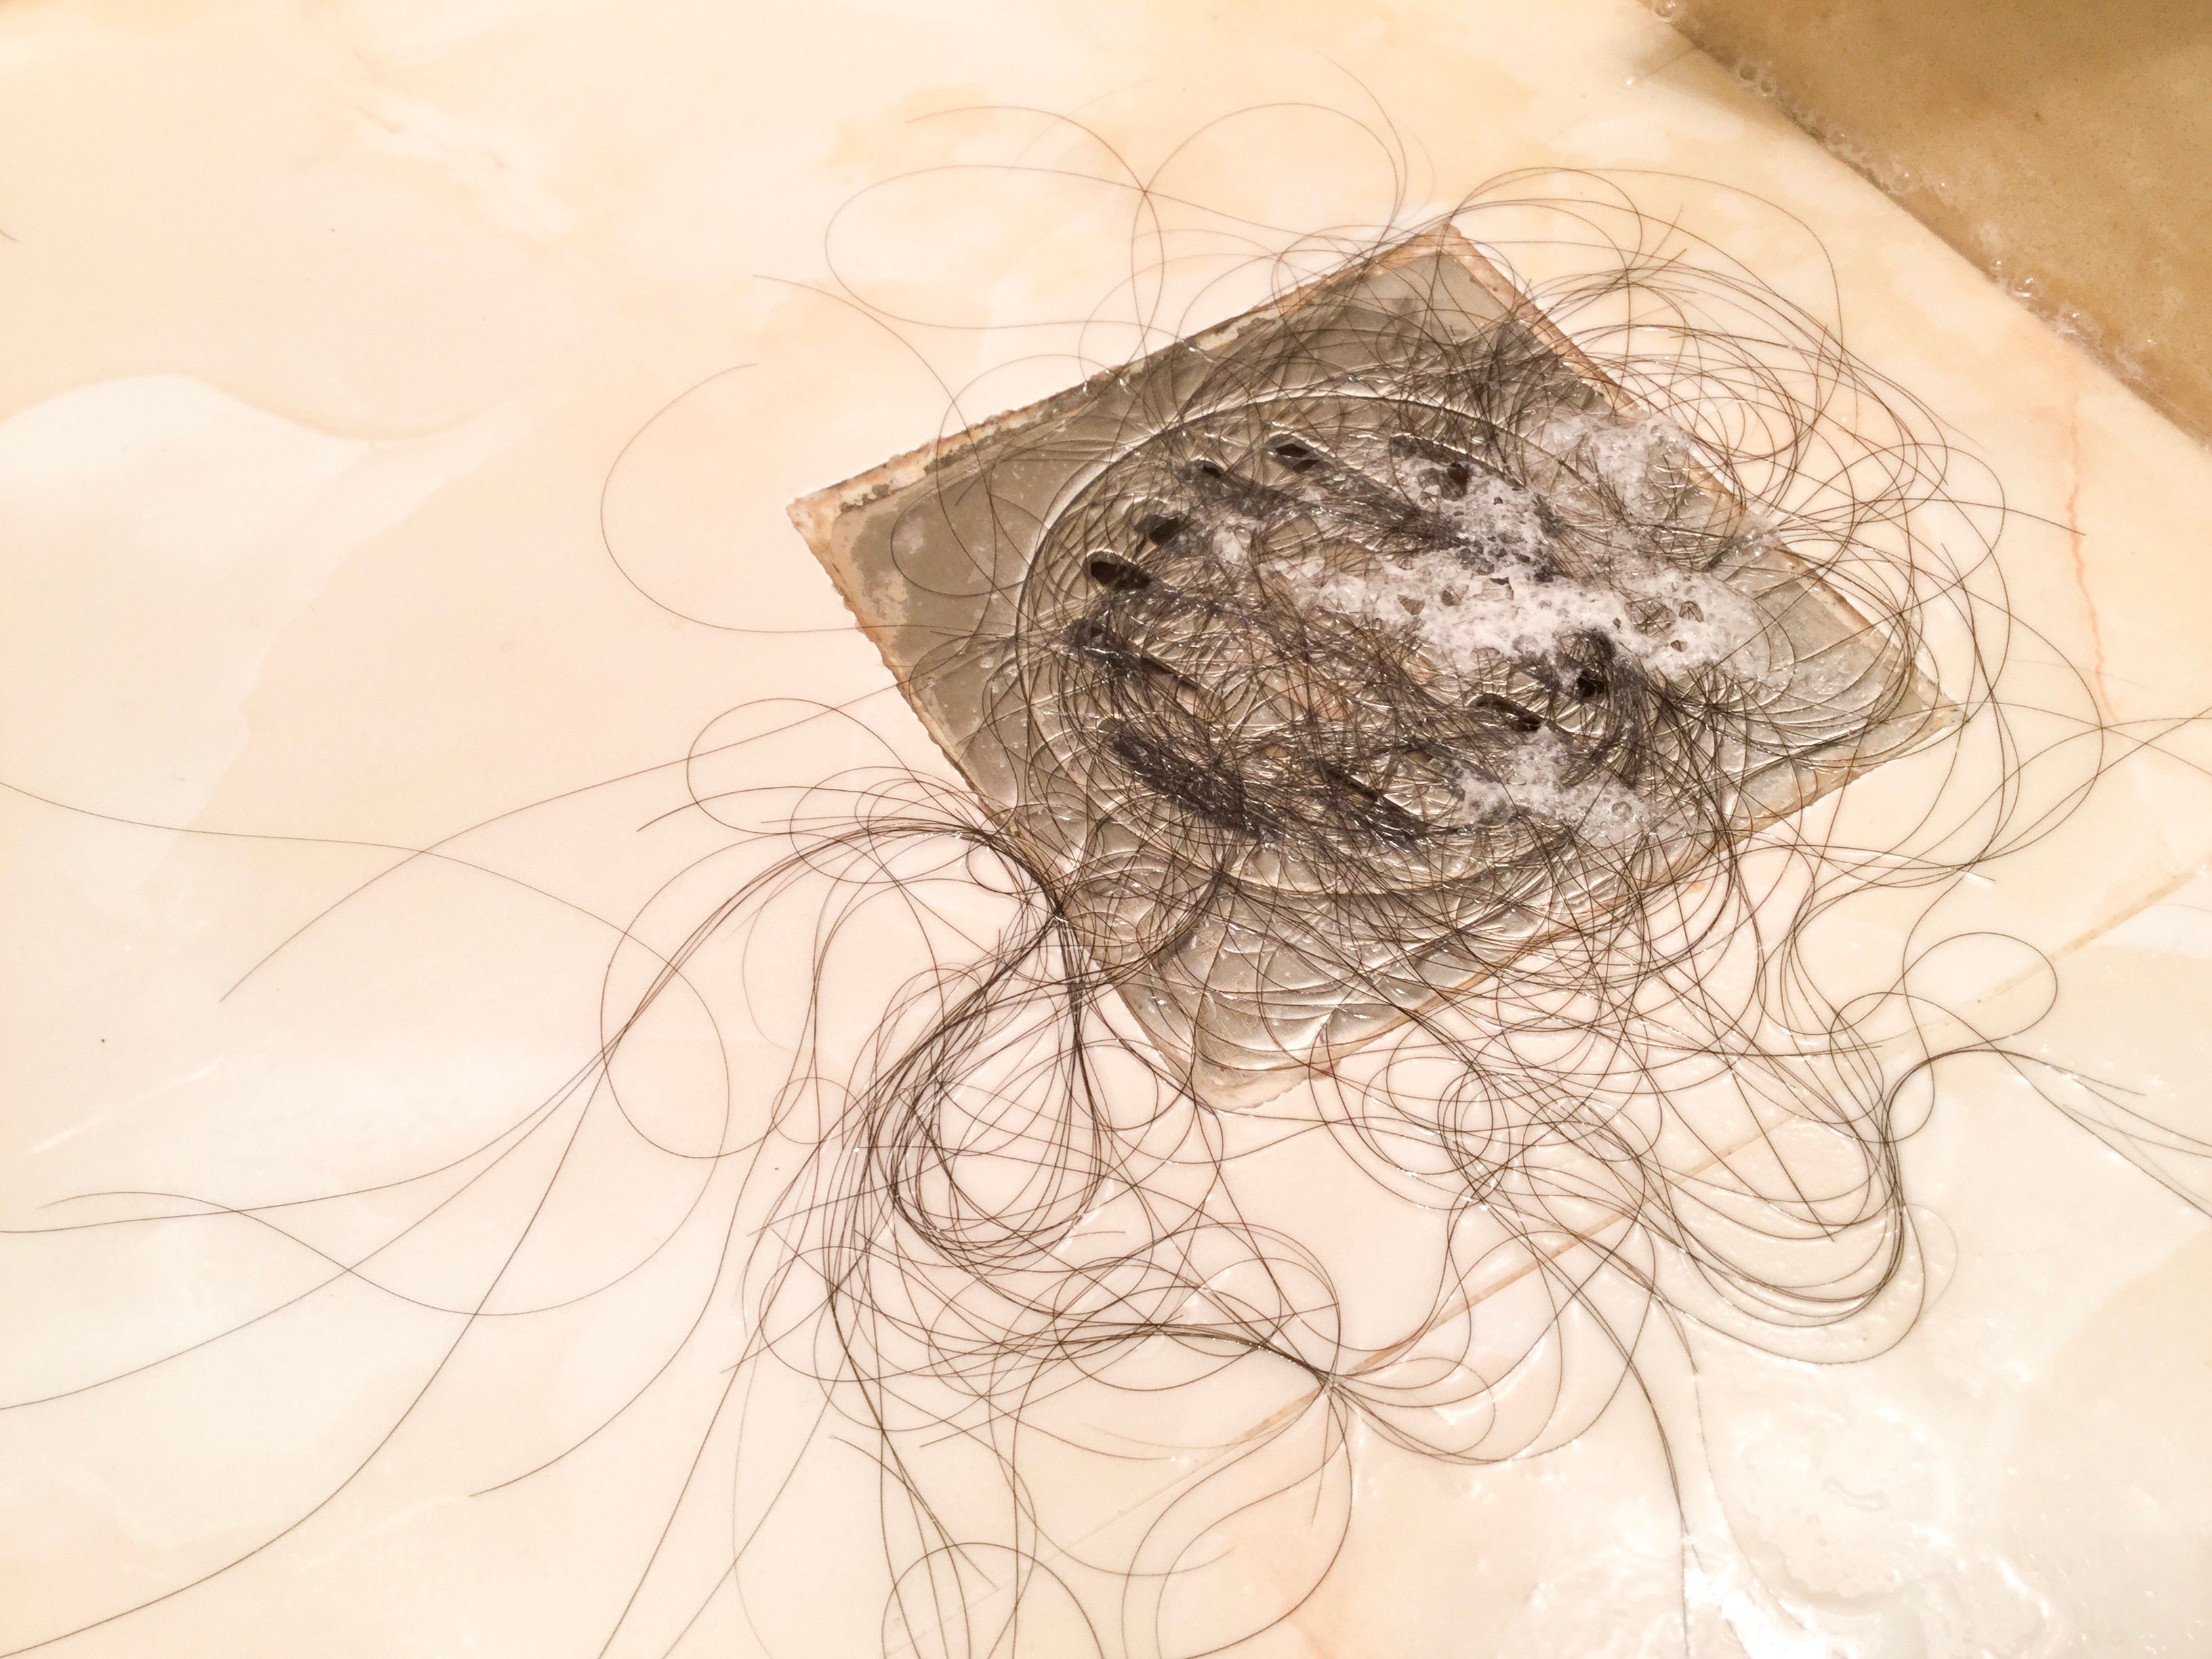 4 Simple Hacks to Remove Hair from a Shower Drain